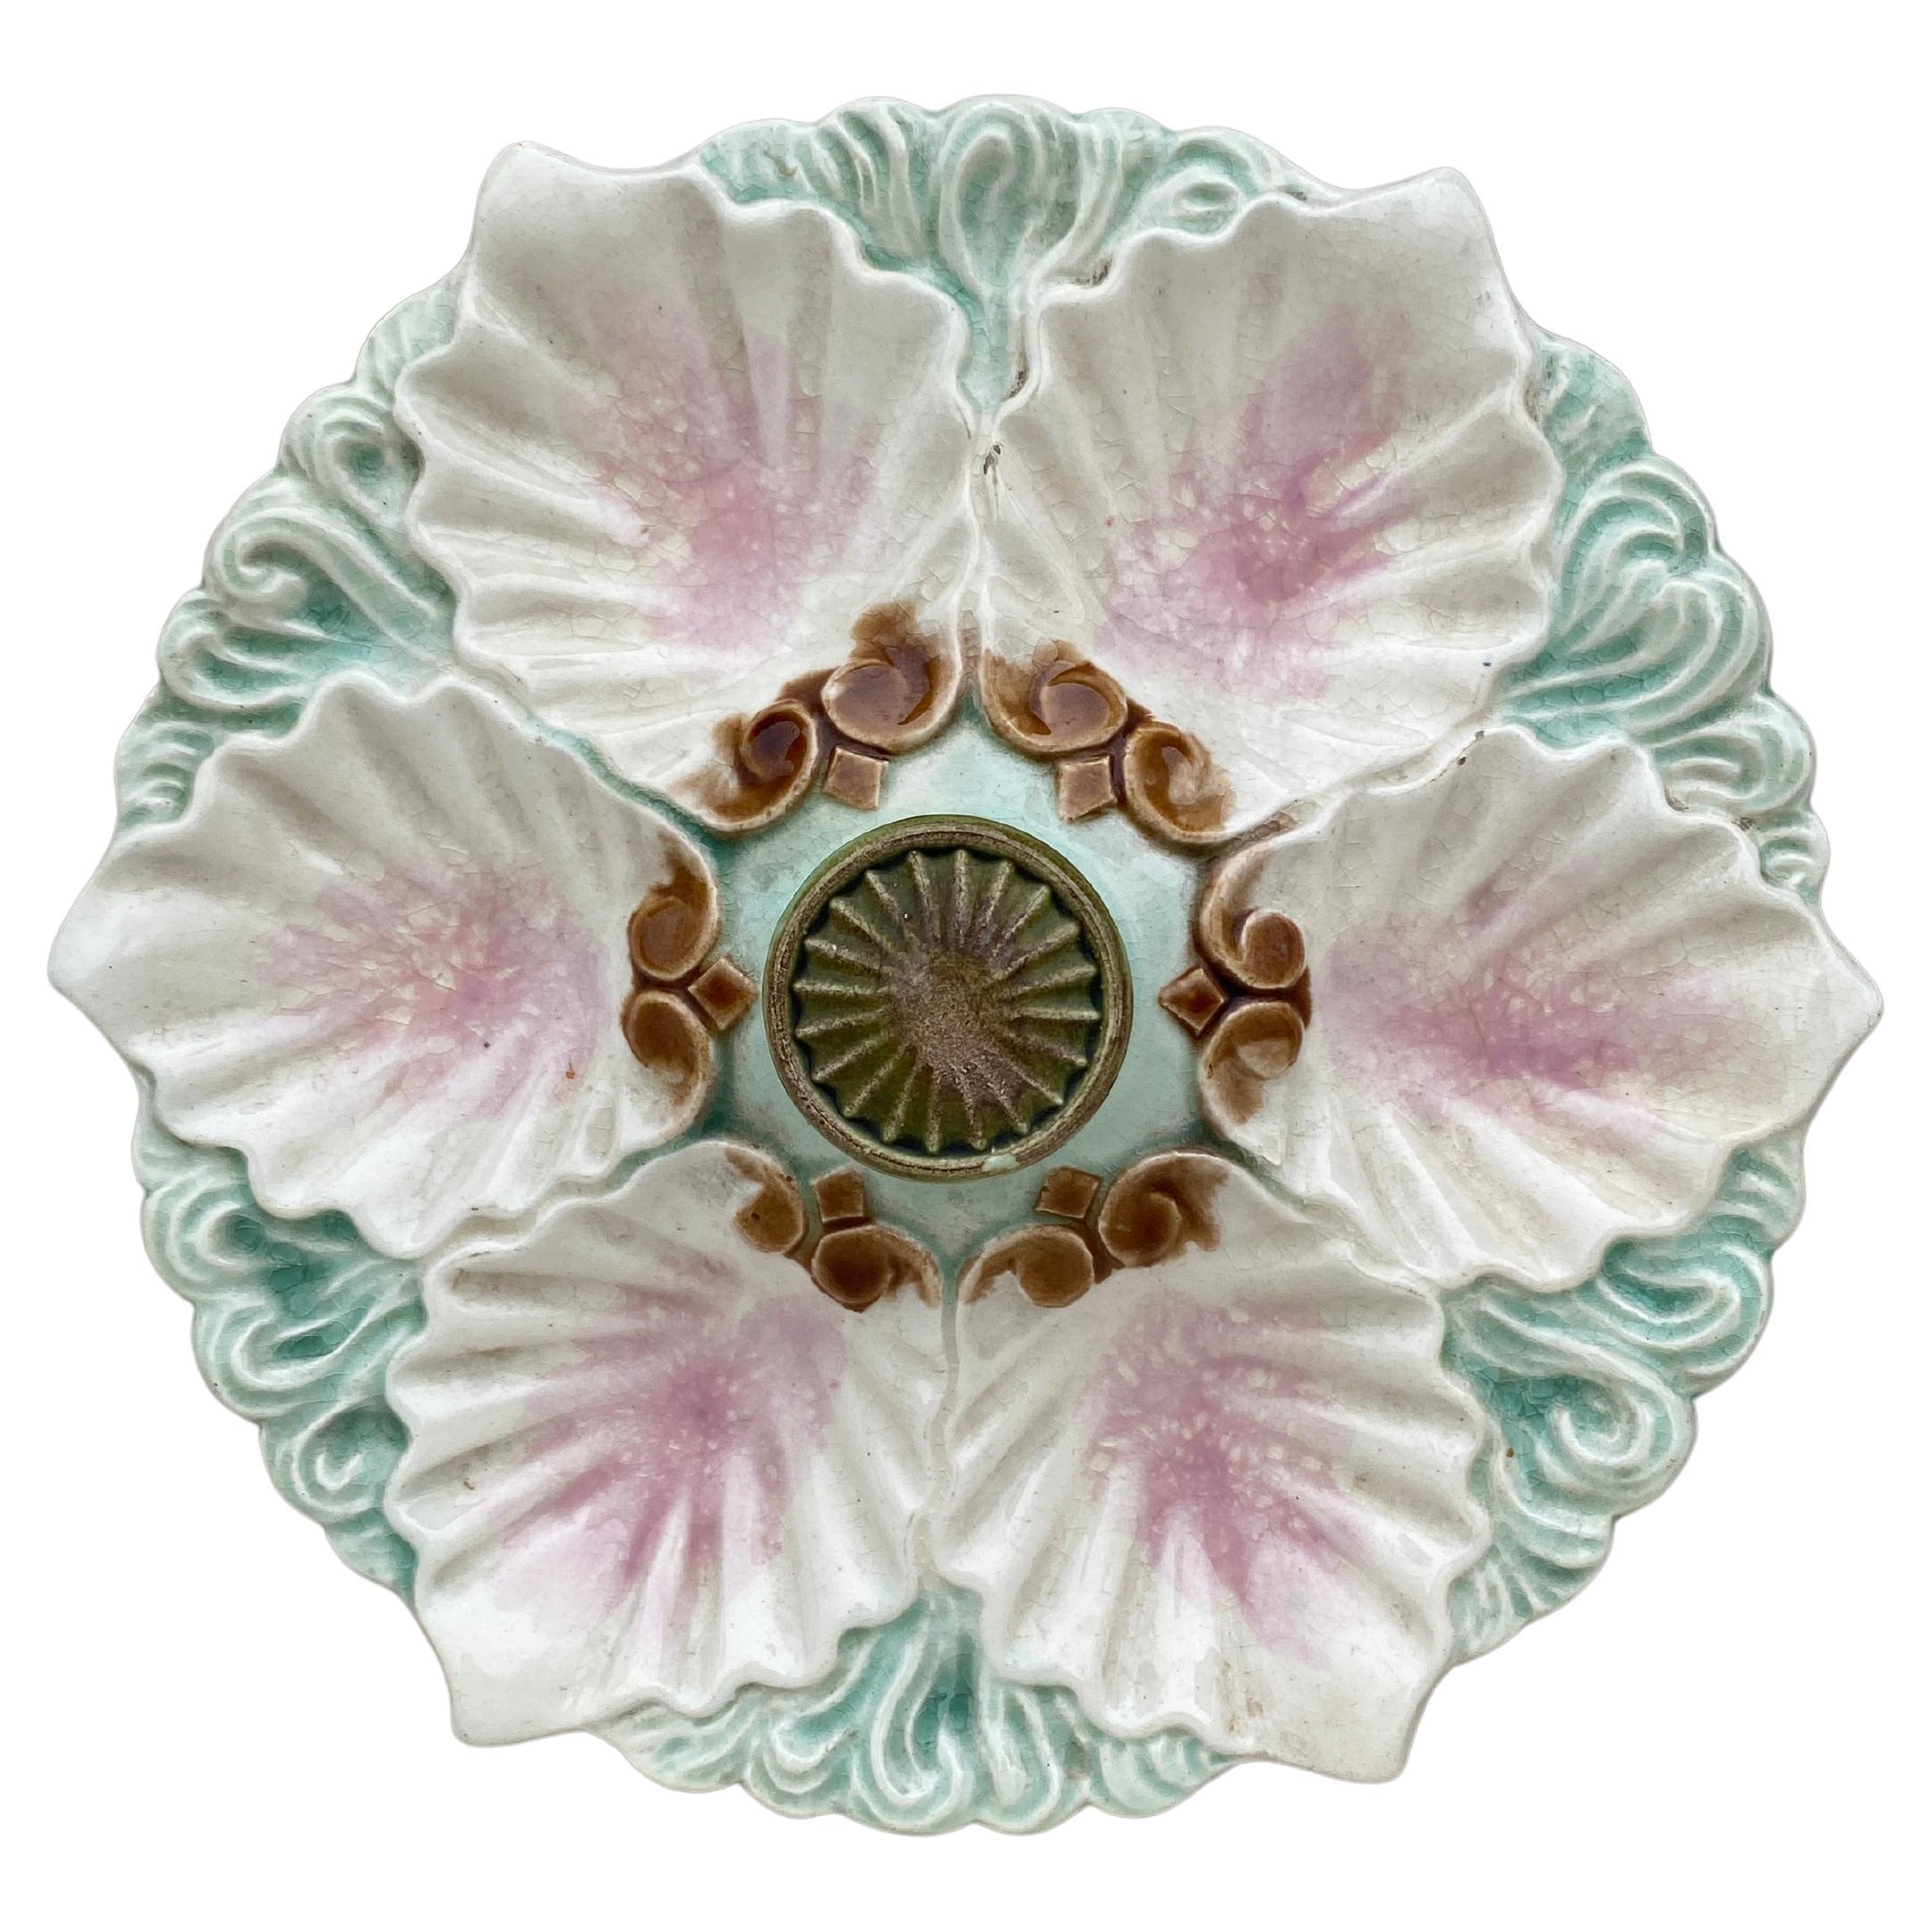 Majolica Handled Oyster Plate Orchies, circa 1890